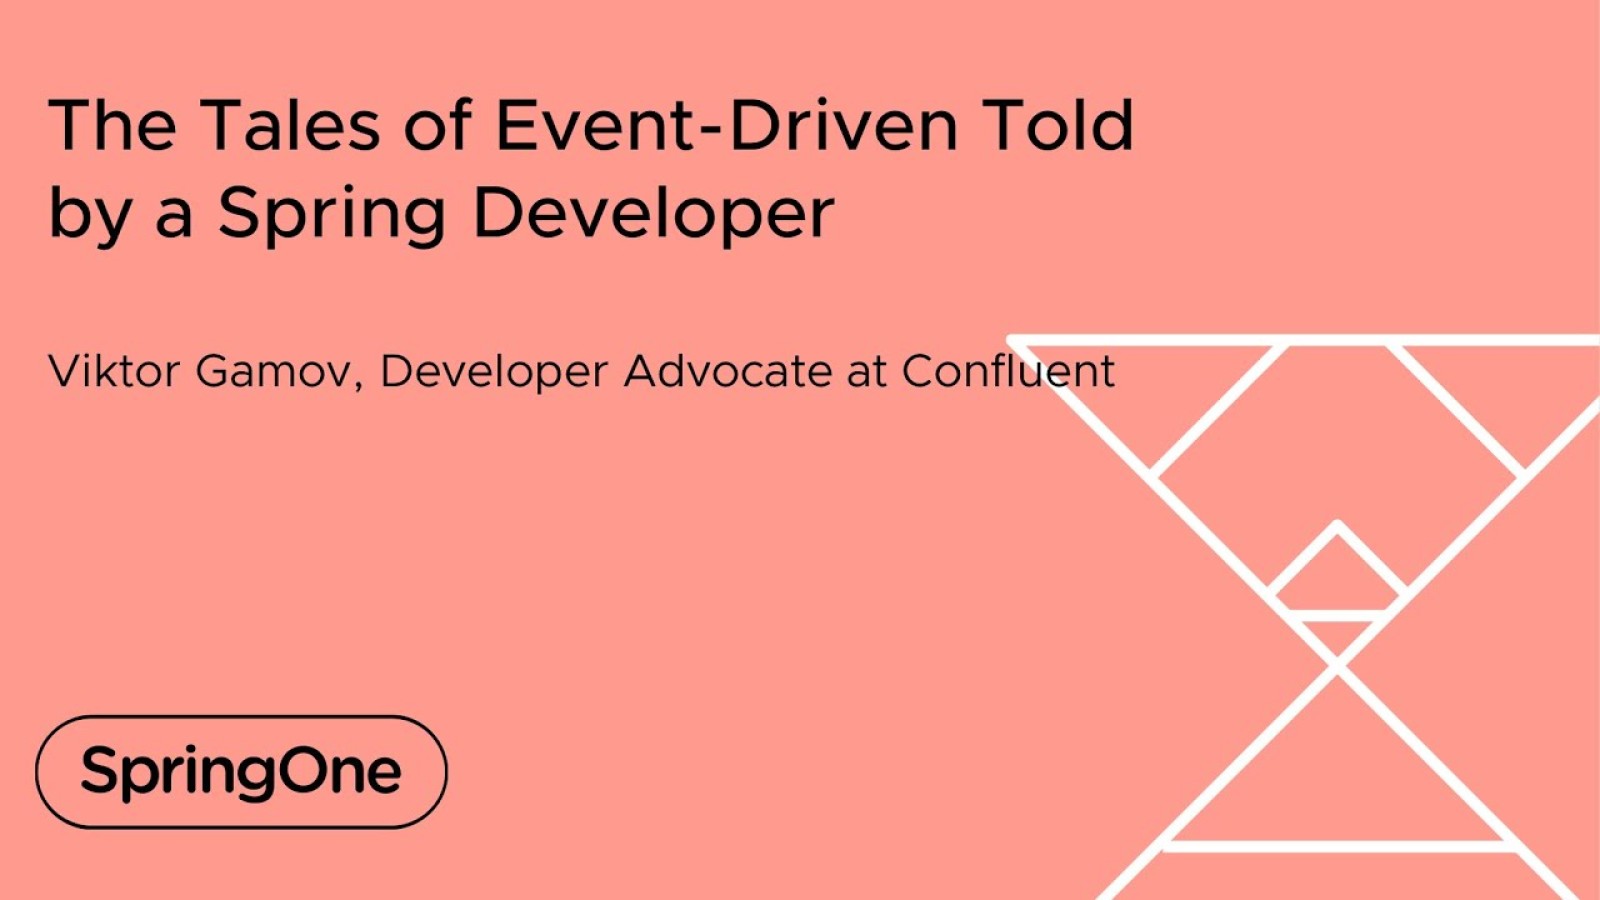 The Tales of Event-Driven Told by a Spring Developer